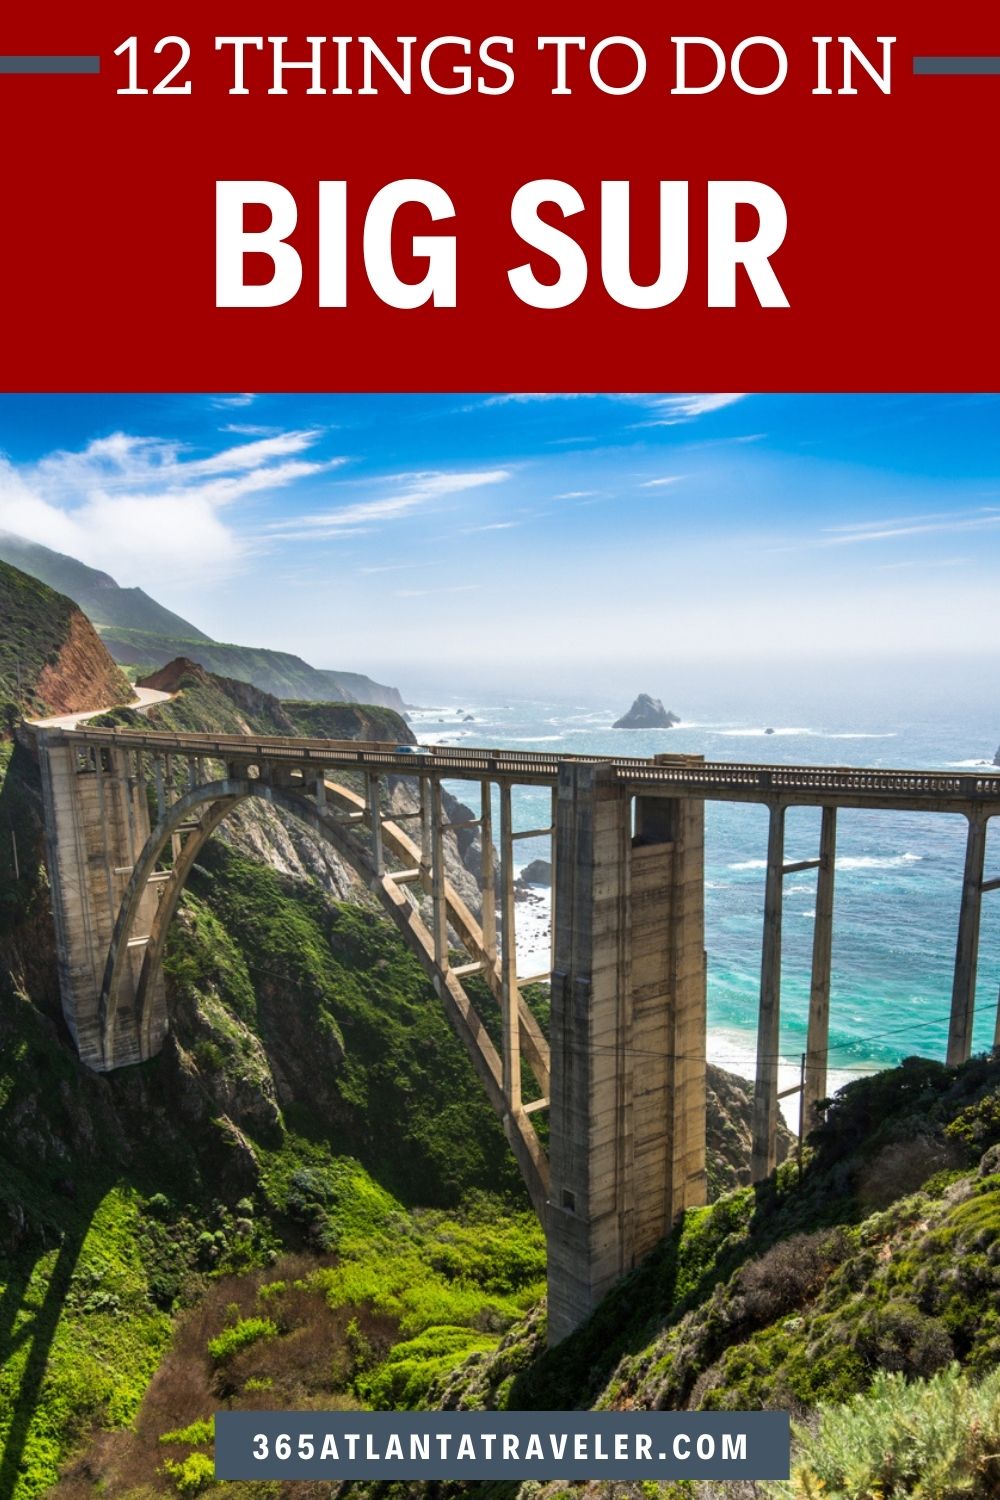 12 OF THE ABSOLUTE BEST THINGS TO DO IN BIG SUR